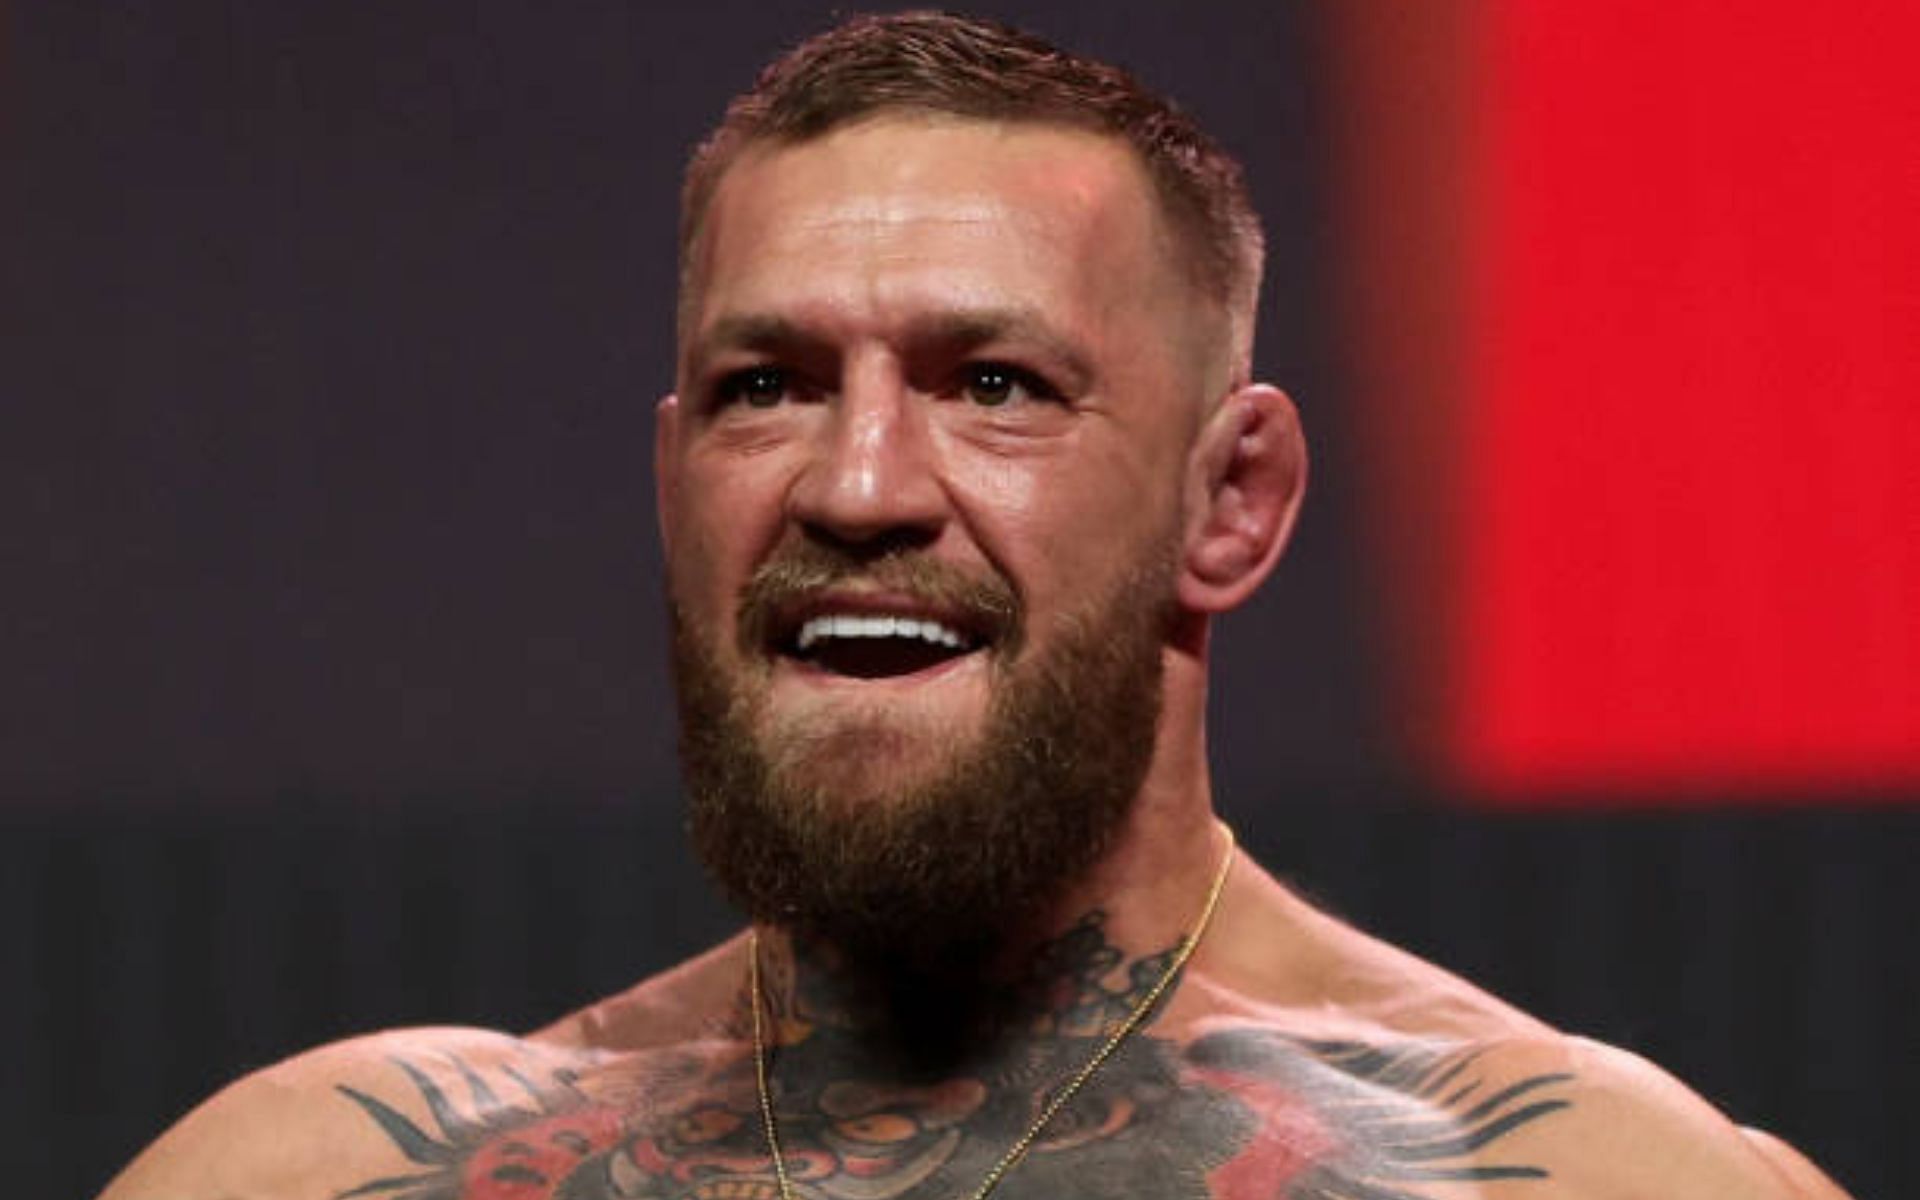 Former double champ Conor McGregor